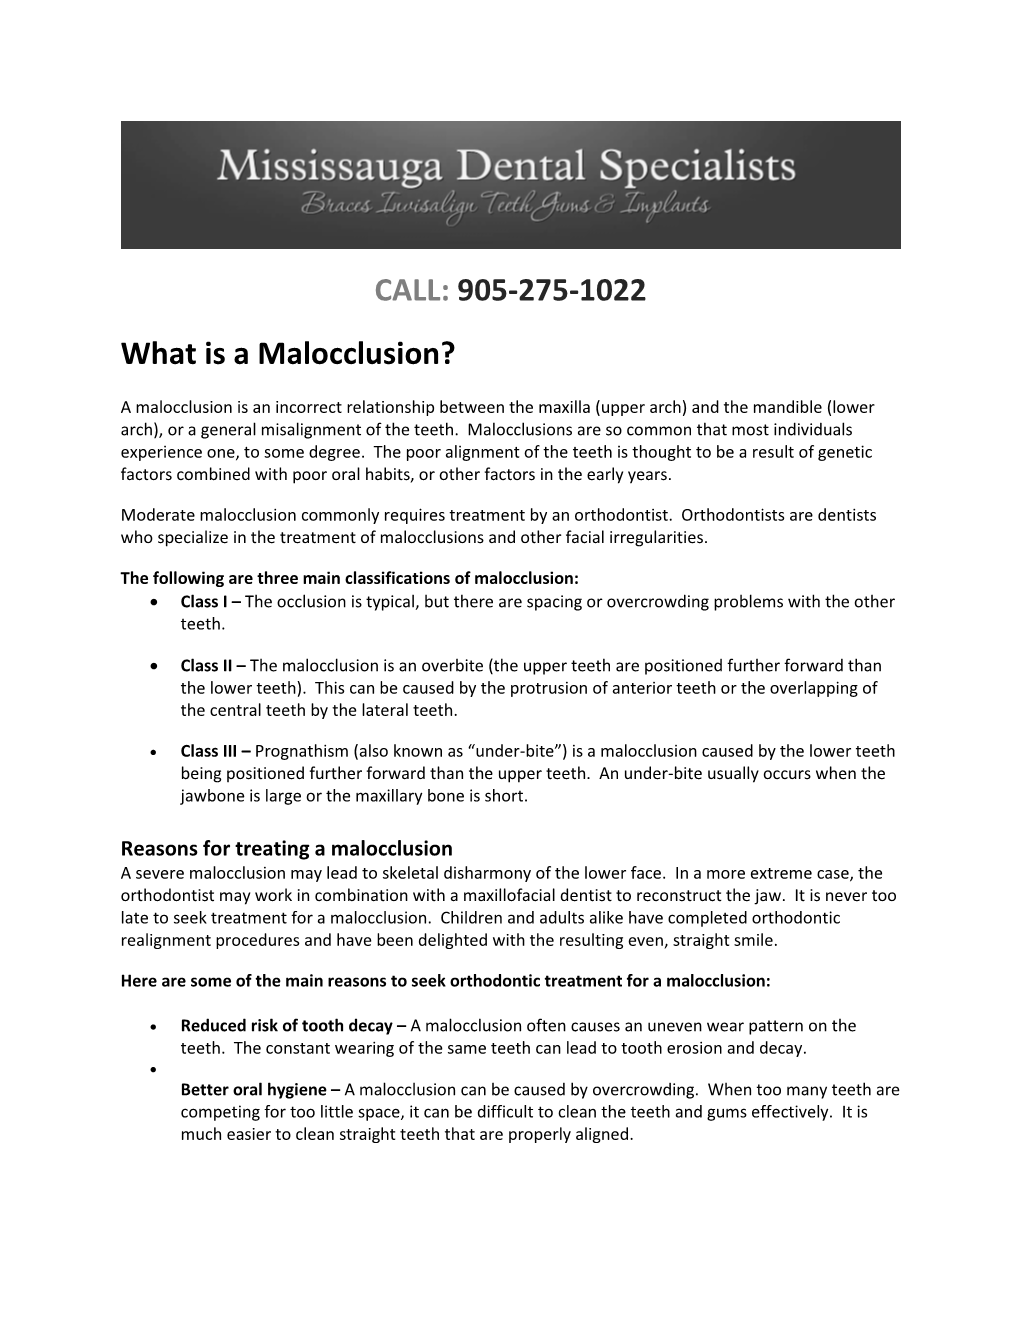 CALL: 905-275-1022 What Is a Malocclusion?